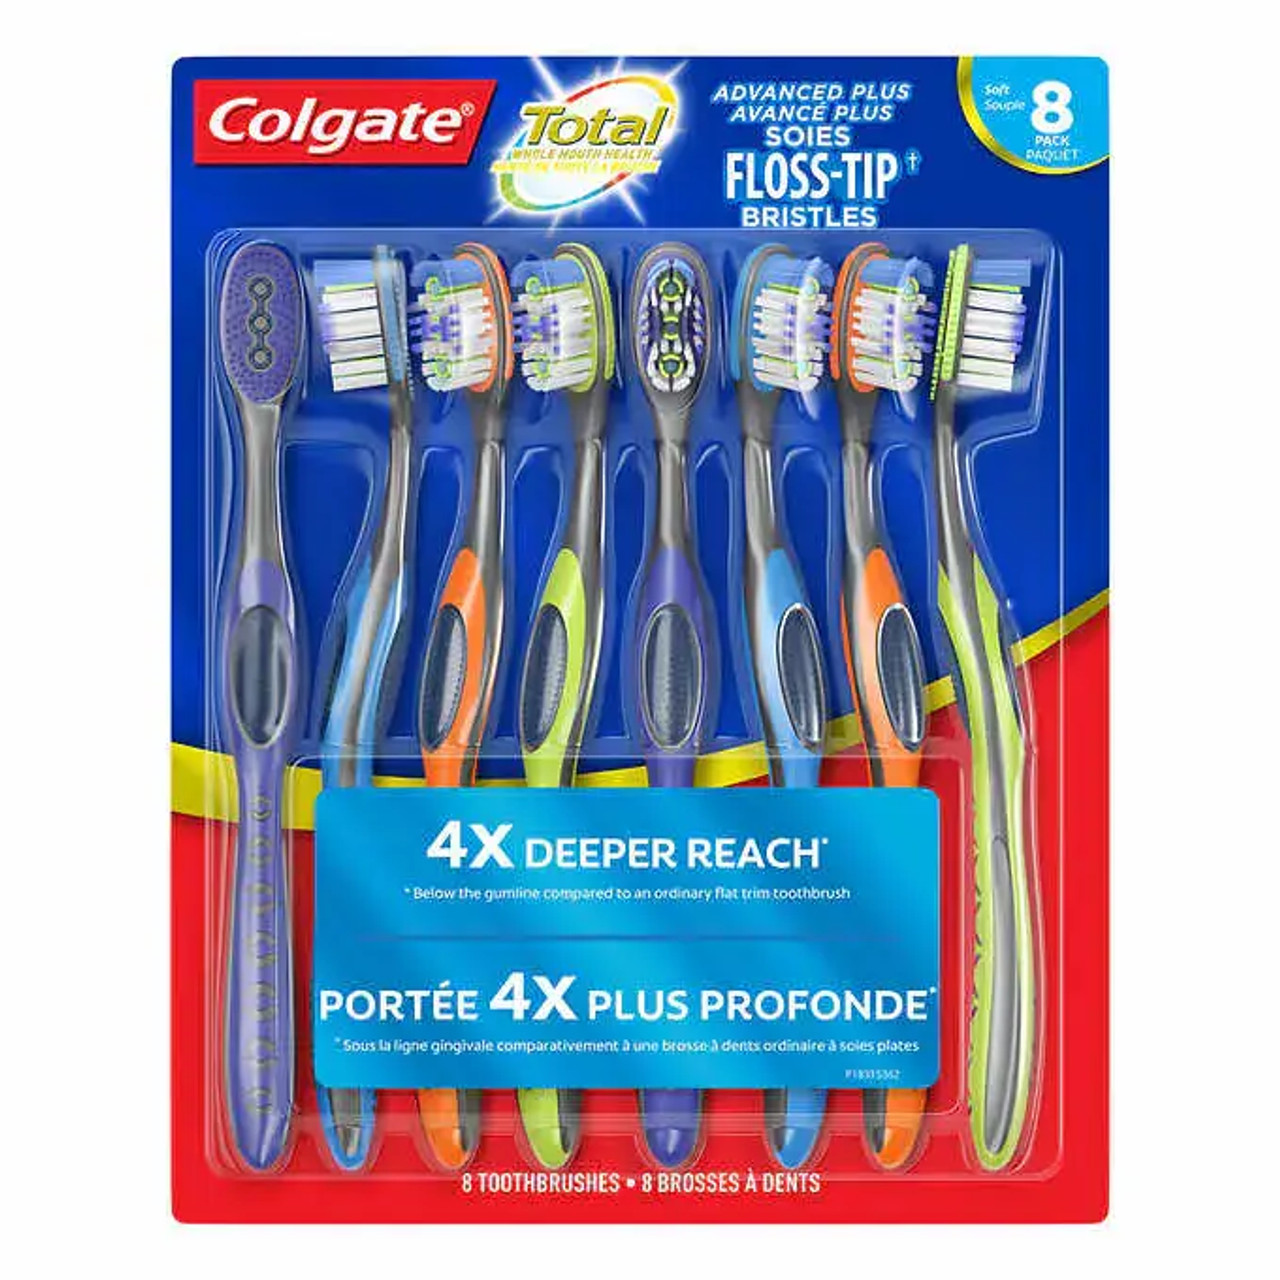 Colgate Total Advanced Plus Floss-Tip Manual Toothbrush, (8/CASE)-Chicken Pieces